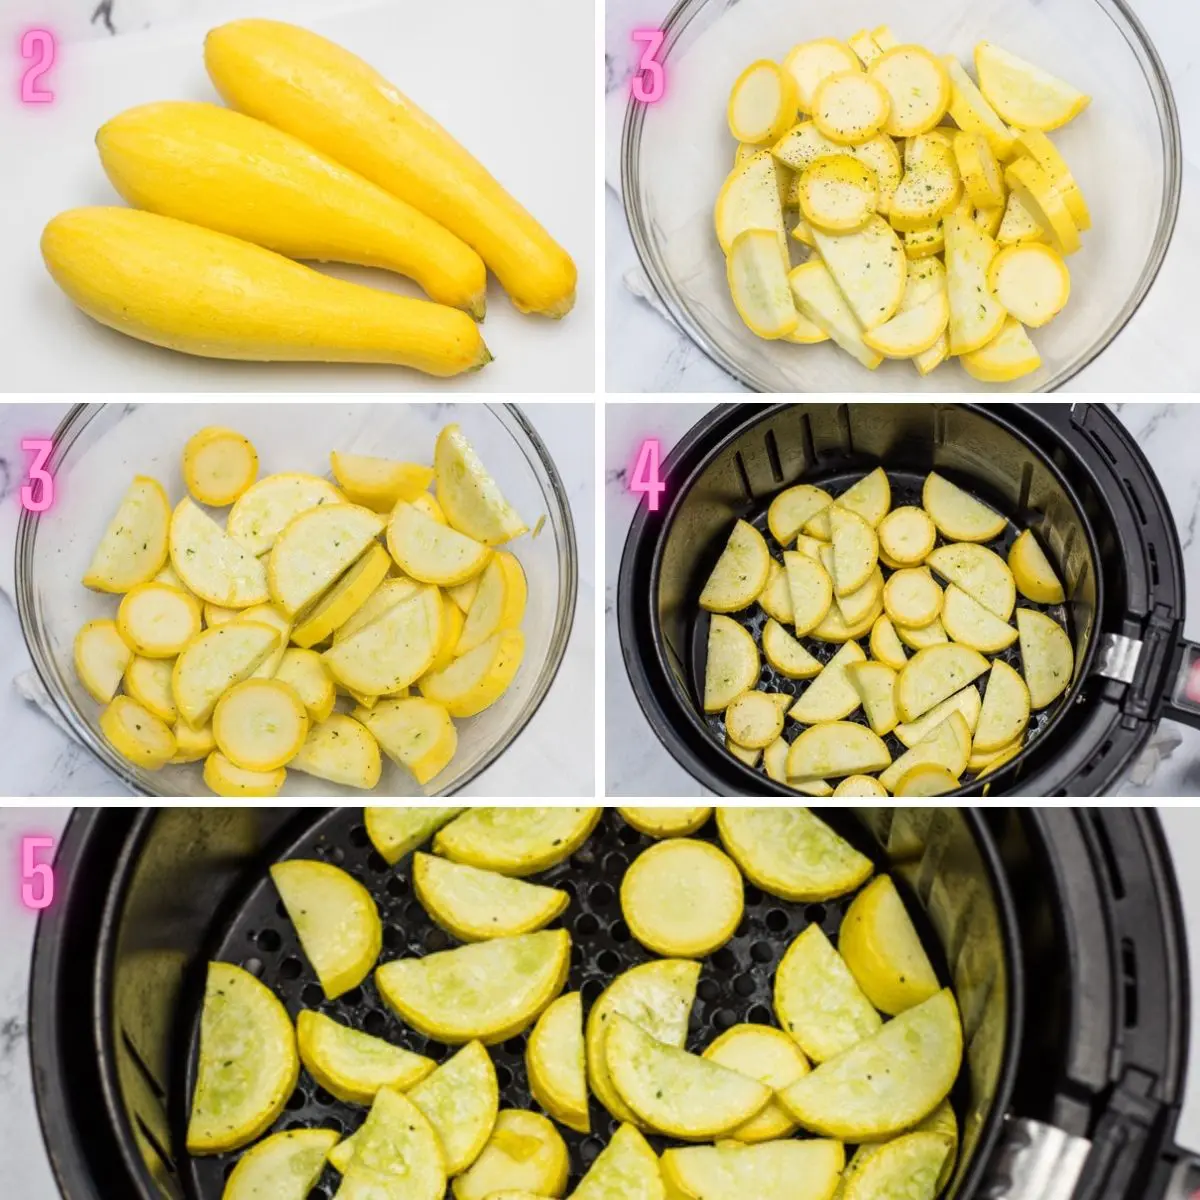 5 step by step process photos of preparing and air frying the squash.